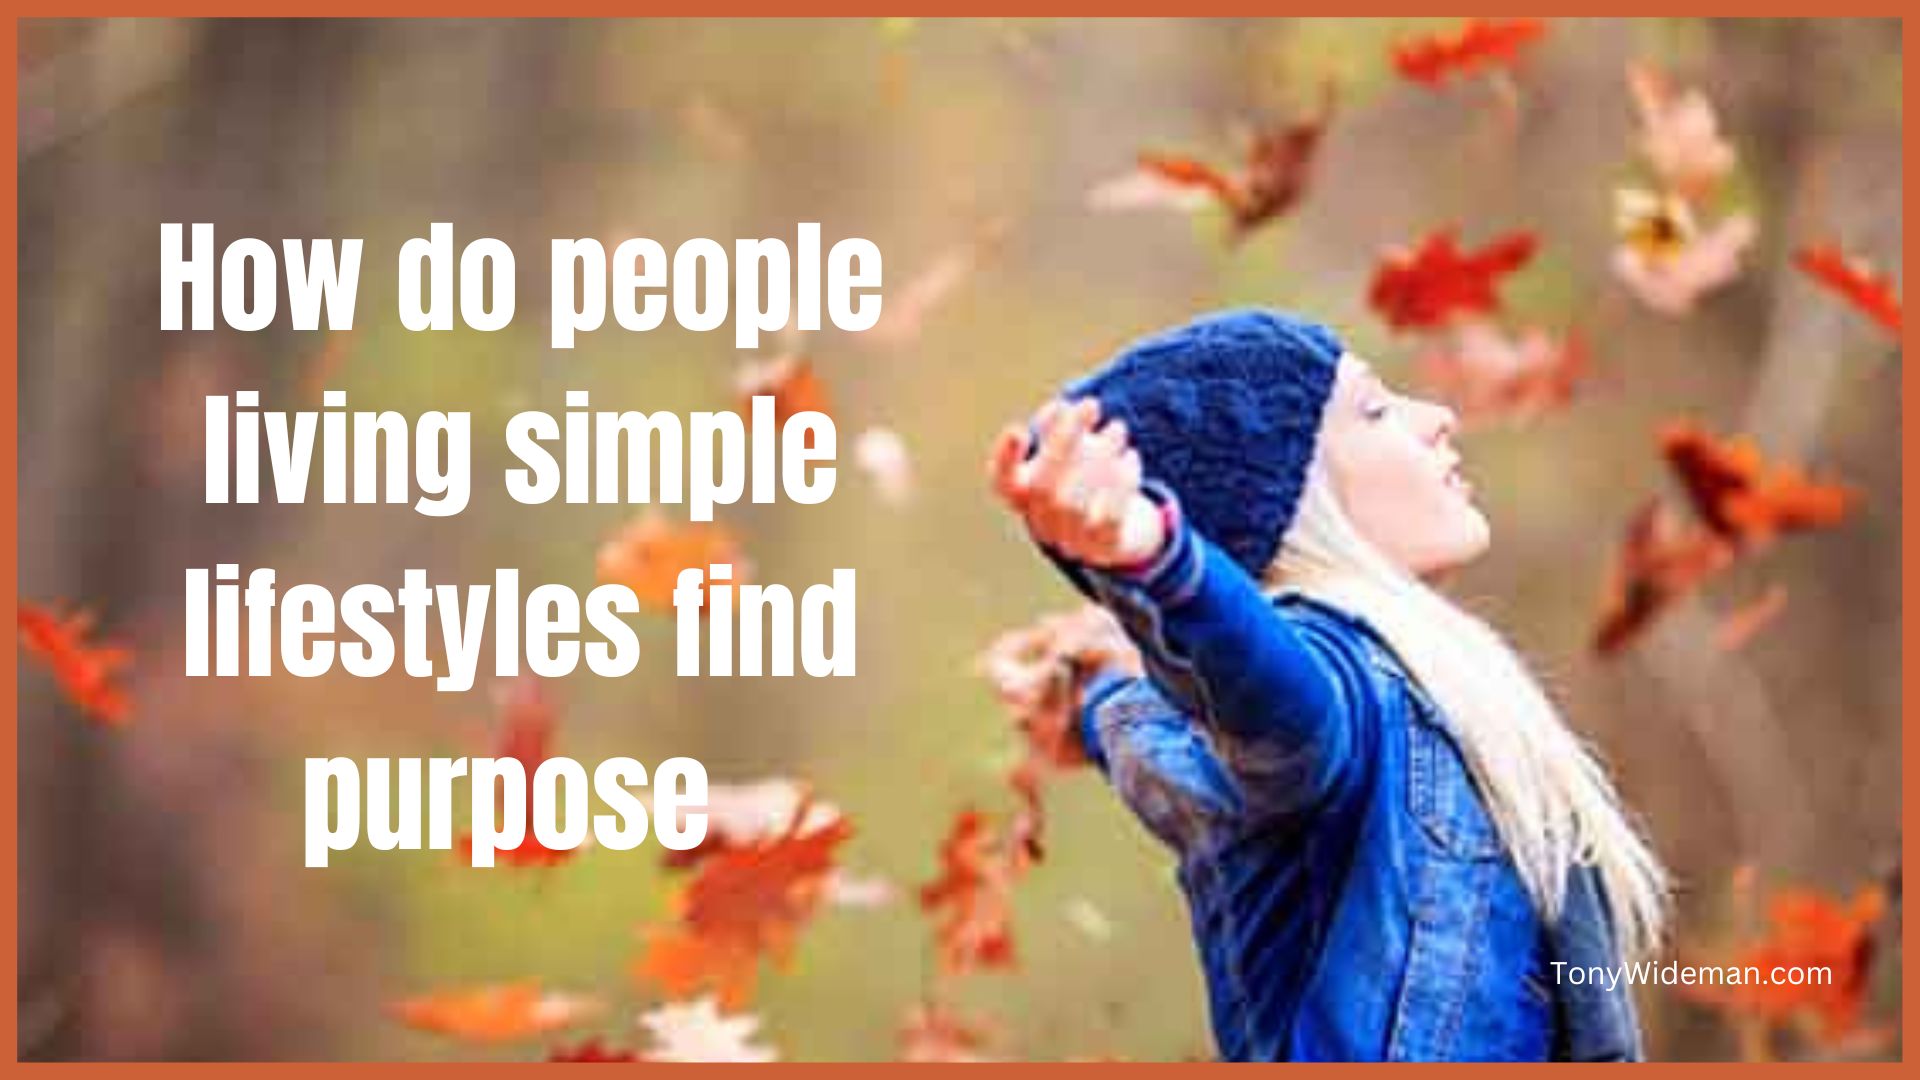 How do people living simple lifestyles find purpose